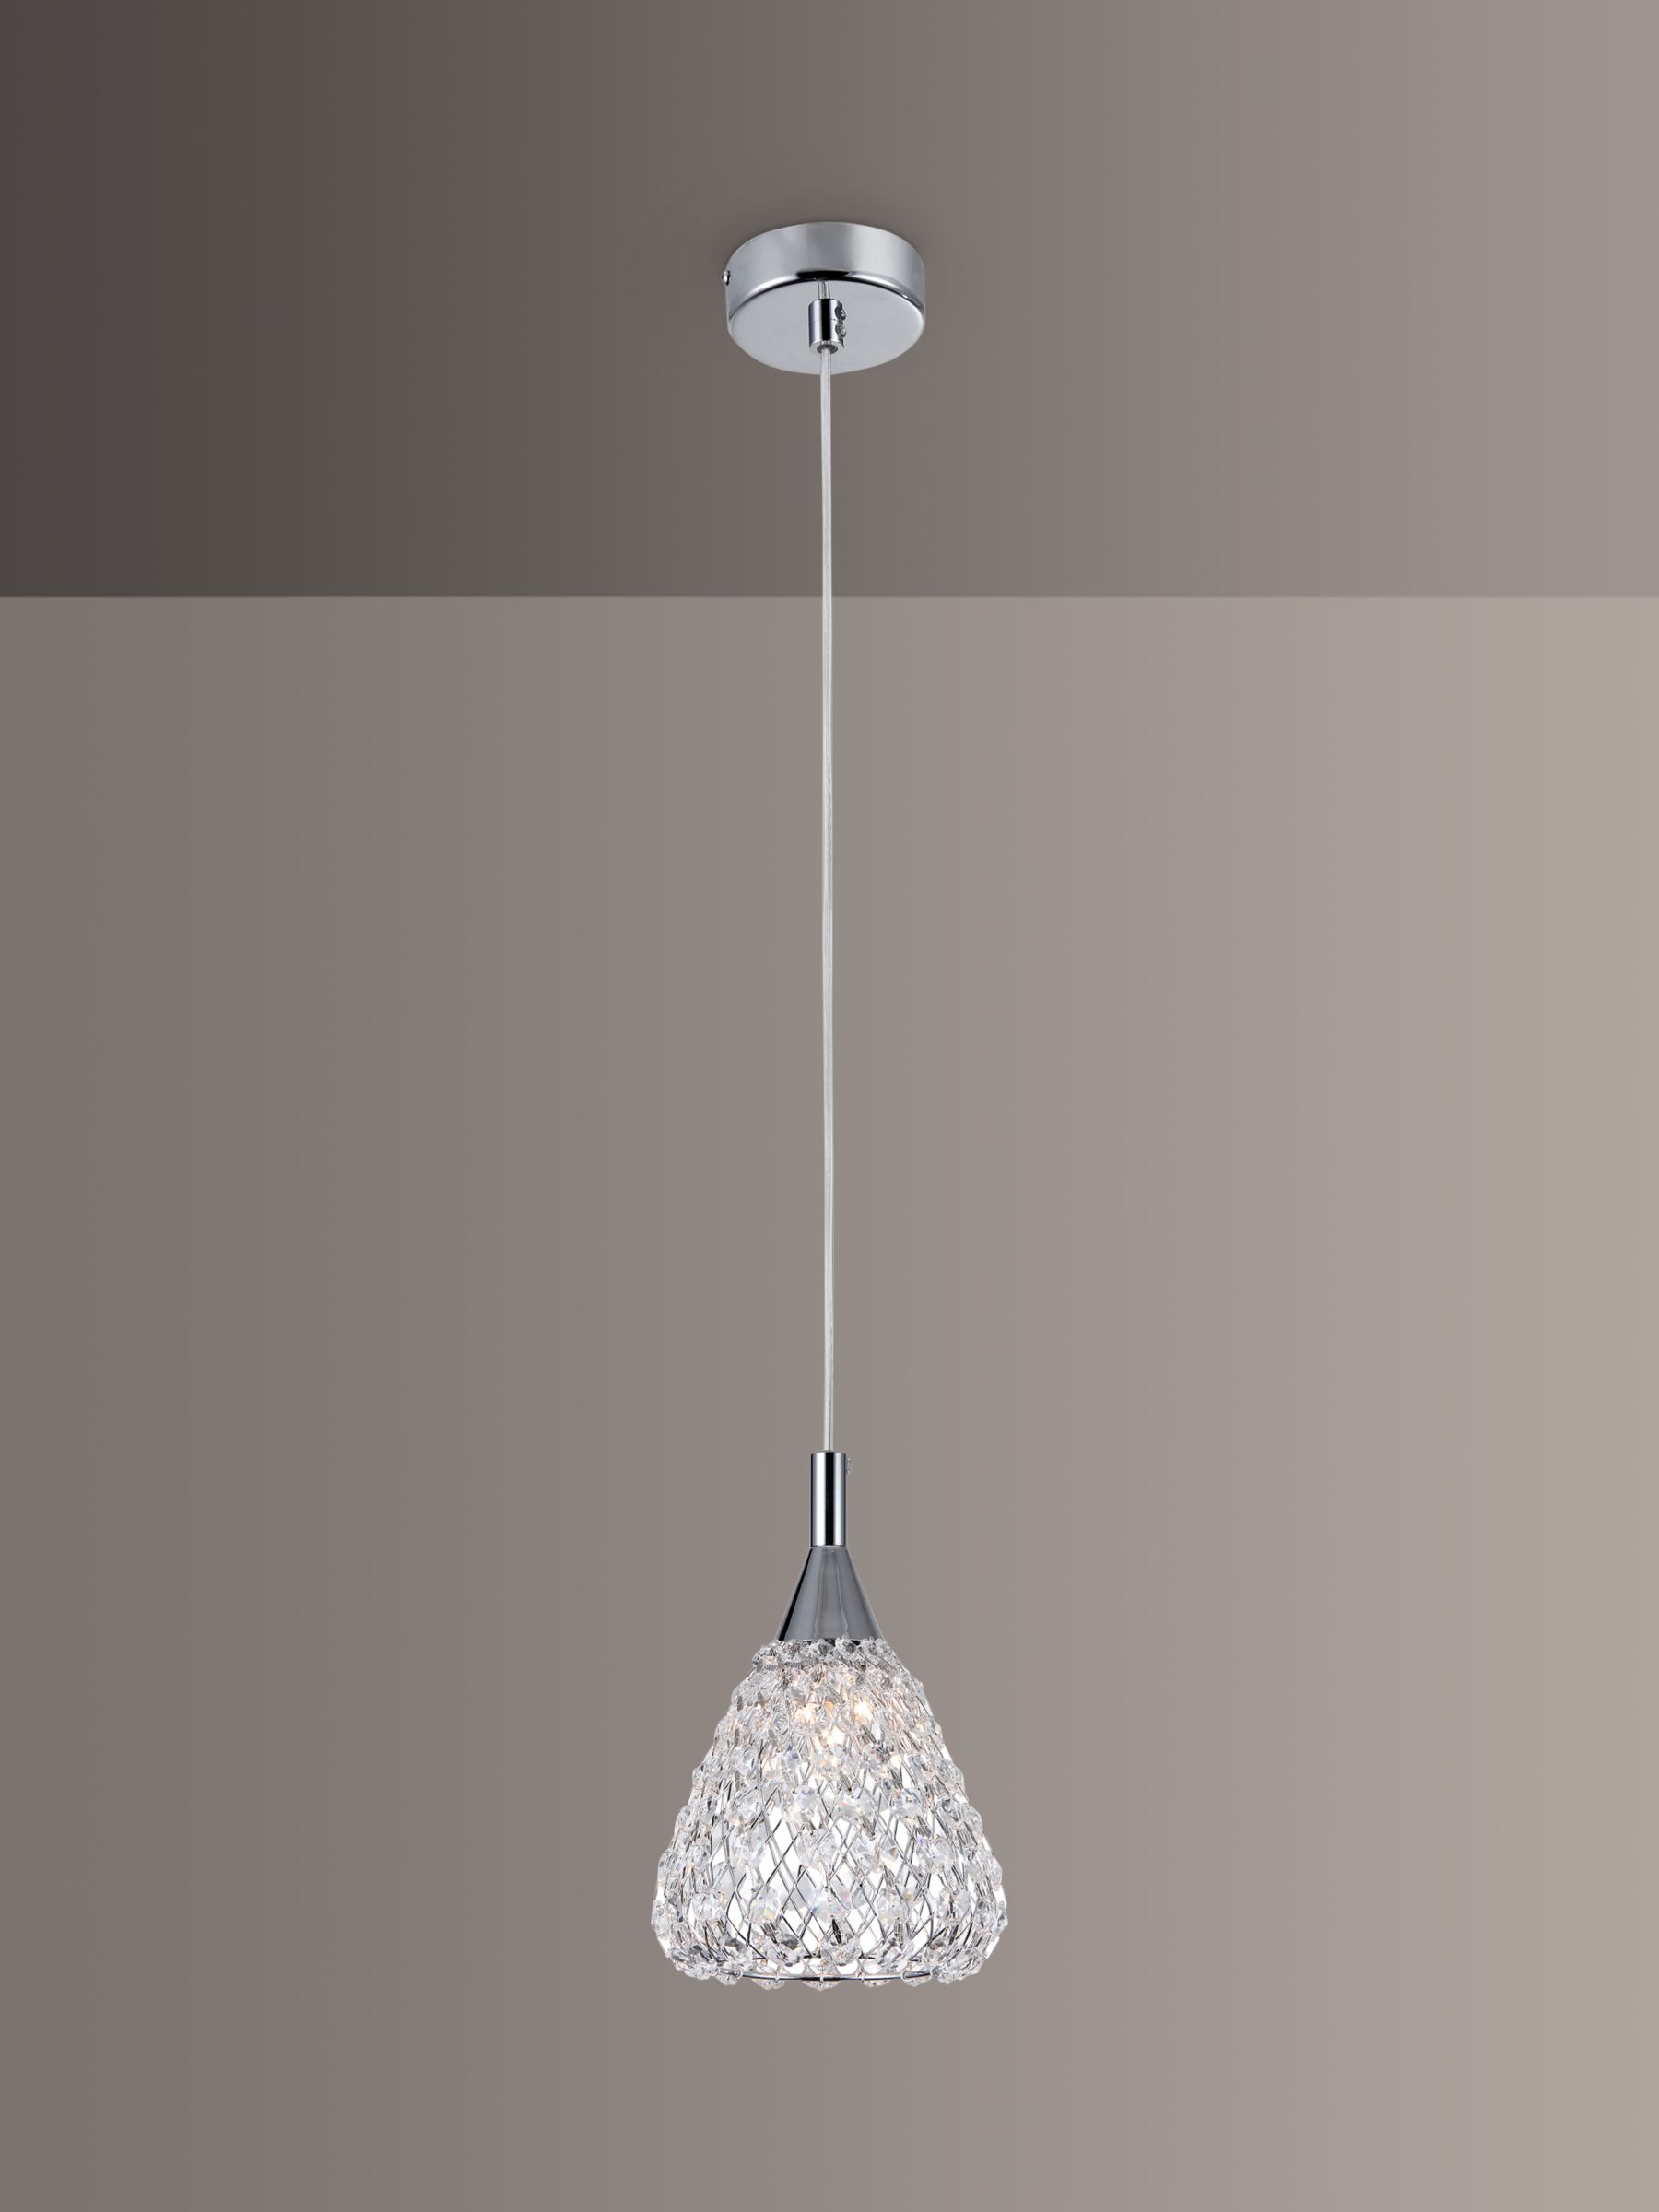 Photo of Impex simone crystal pendant ceiling light clear/chrome